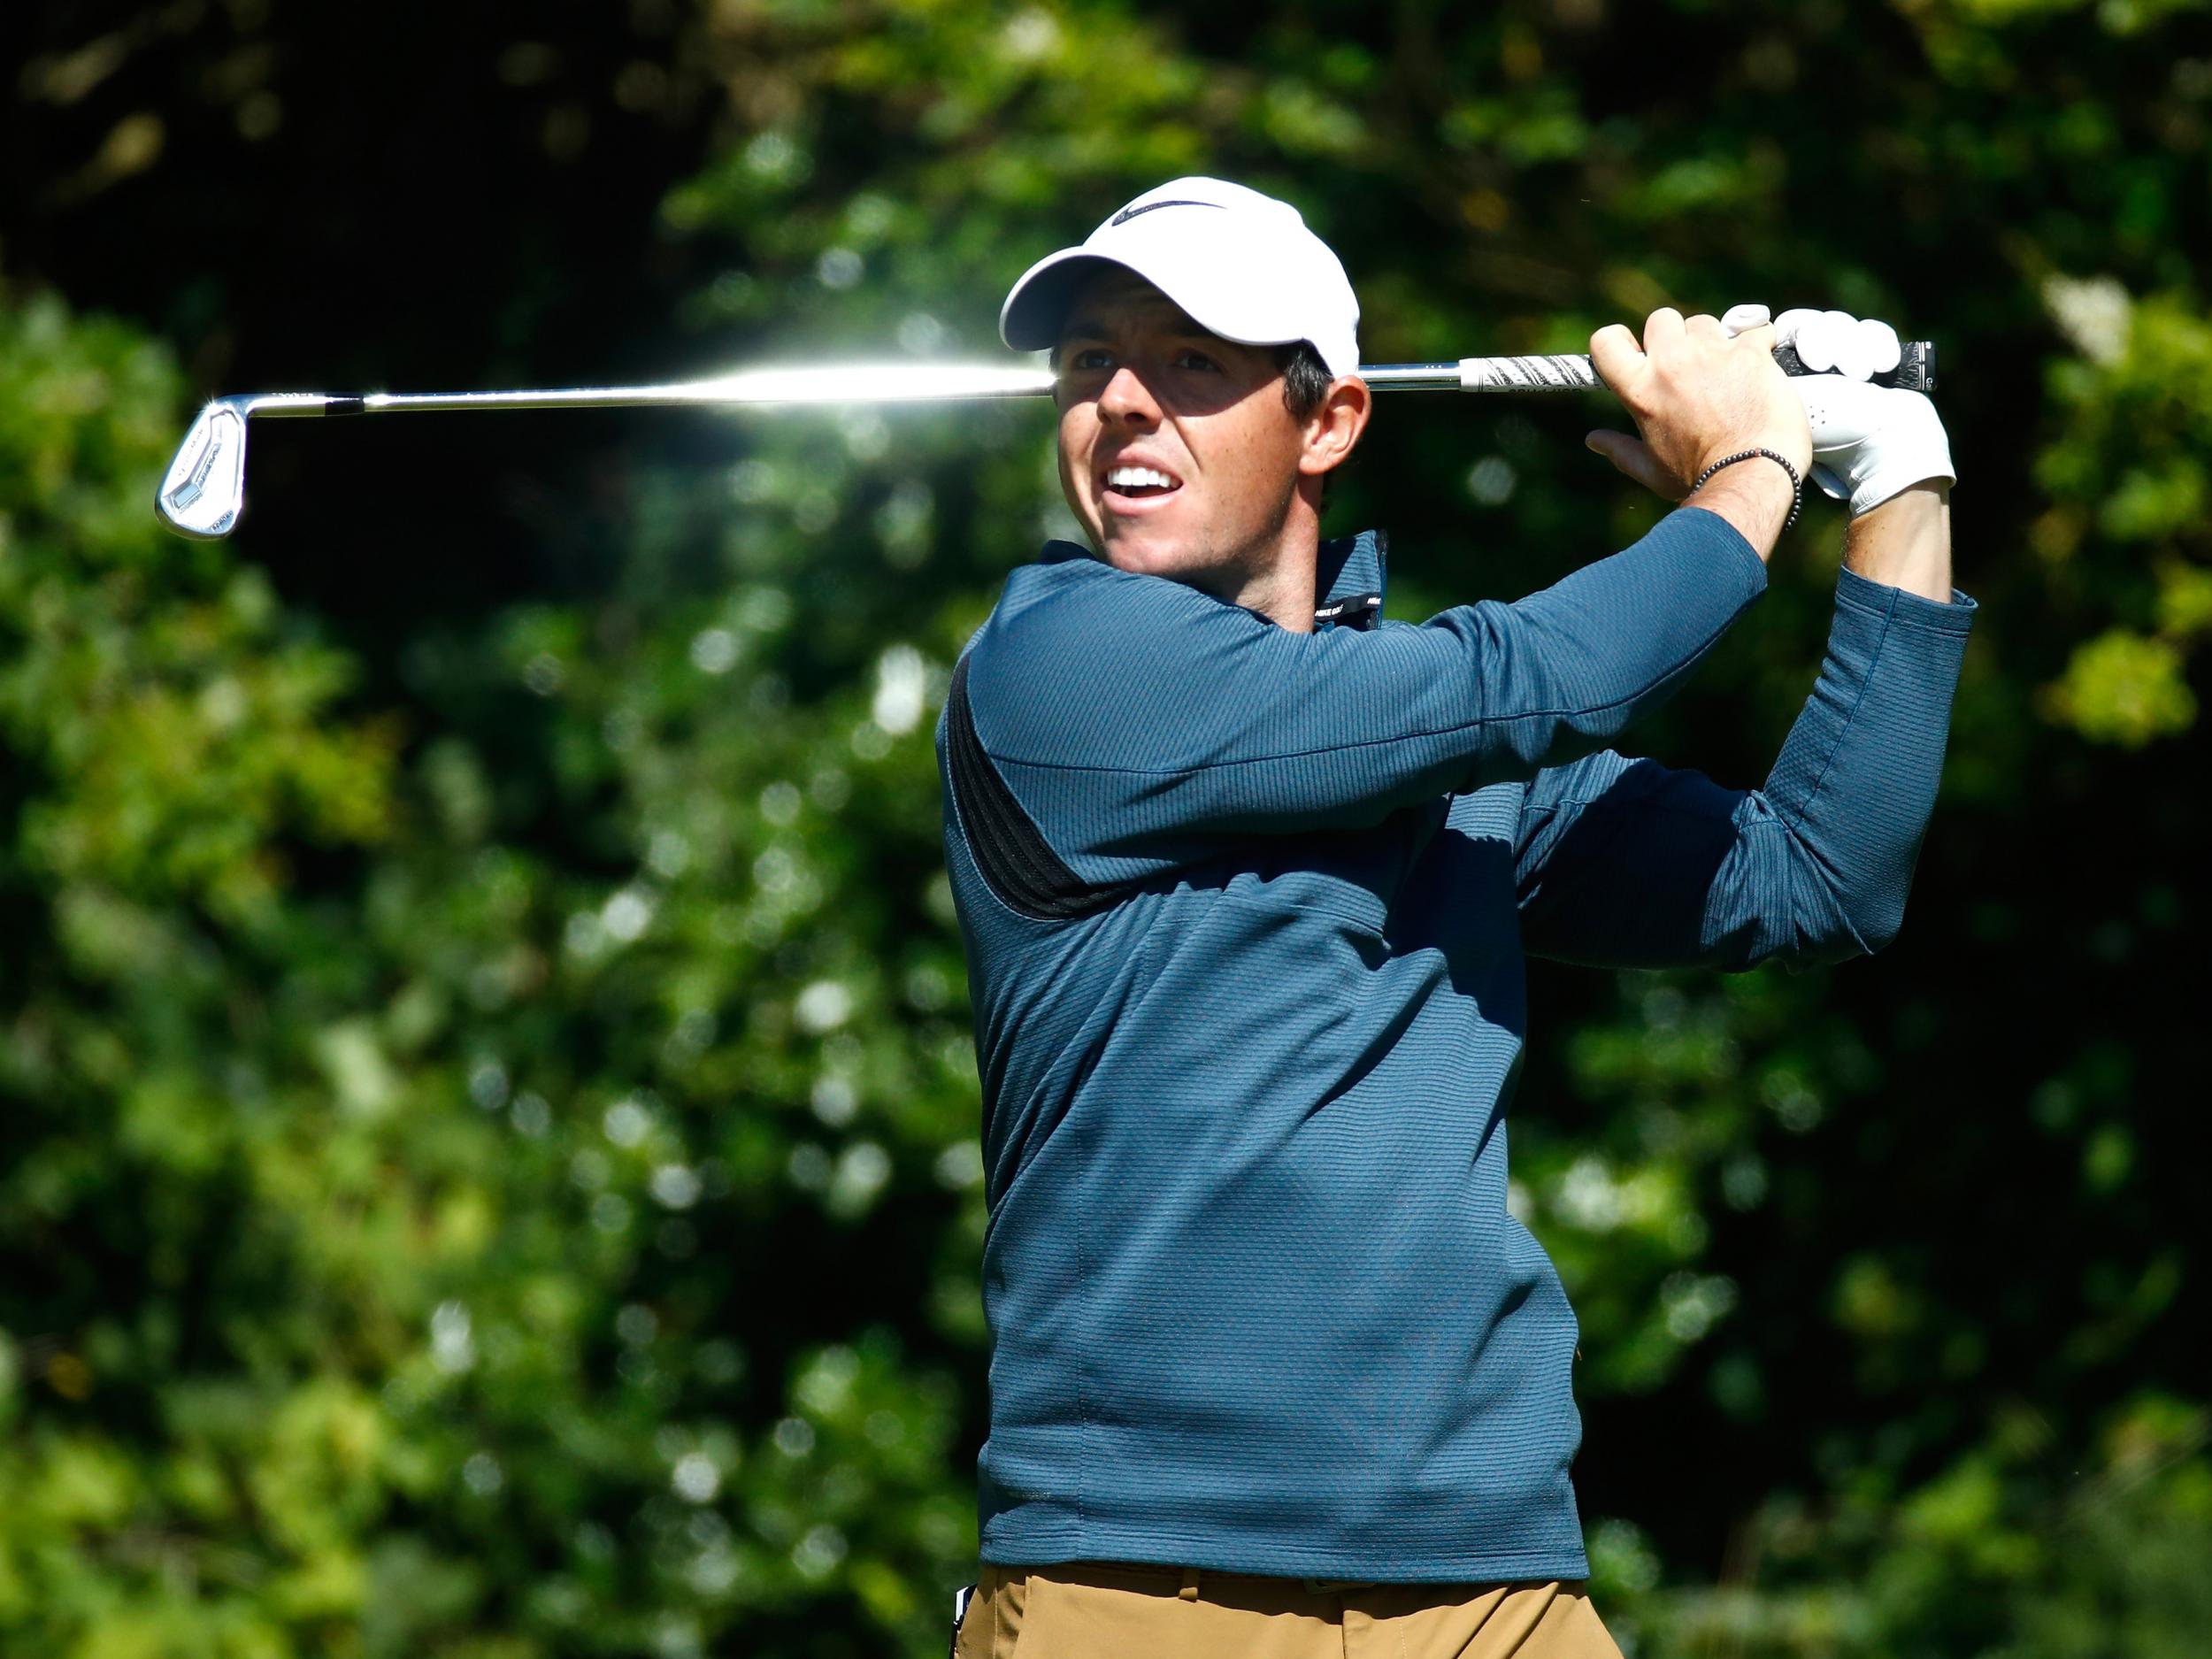 McIlroy has not made the cut in three of his last four tournaments